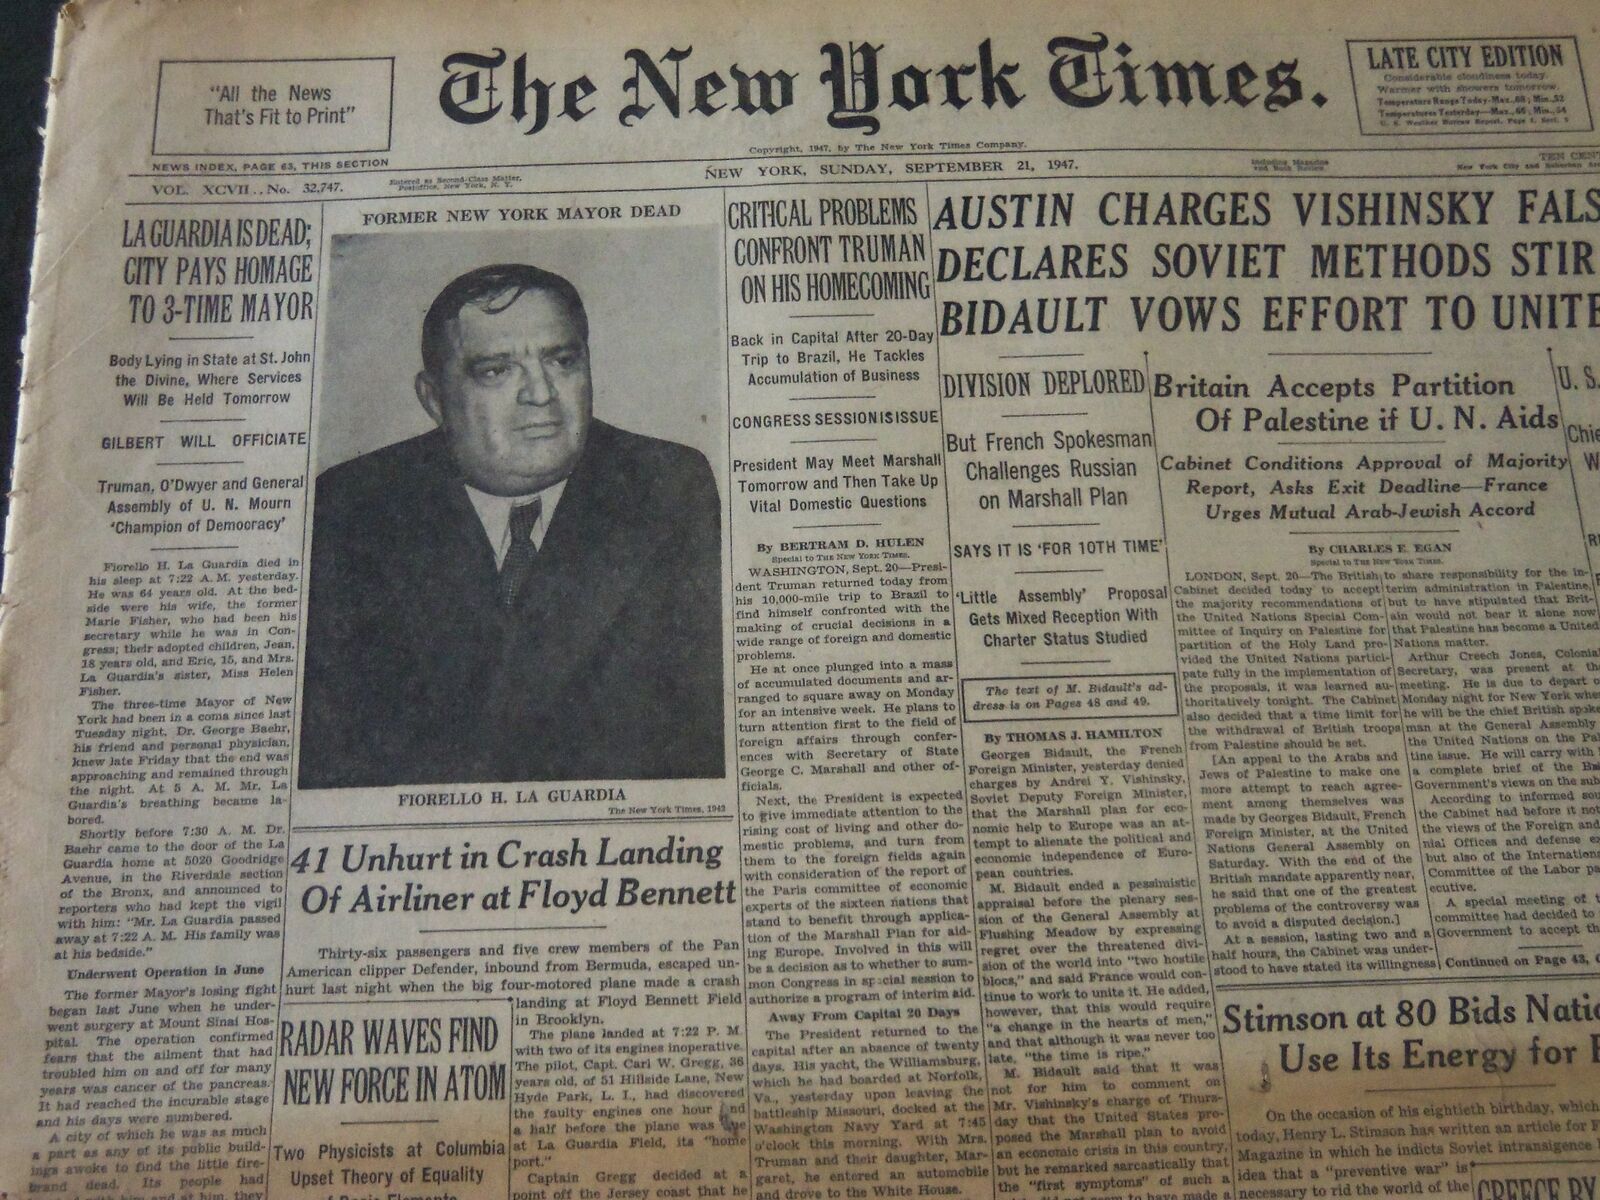 1947 SEPTEMBER 21 NEW YORK TIMES NEWSPAPER - LAGUARDIA IS DEAD AT 64 - NT 5514